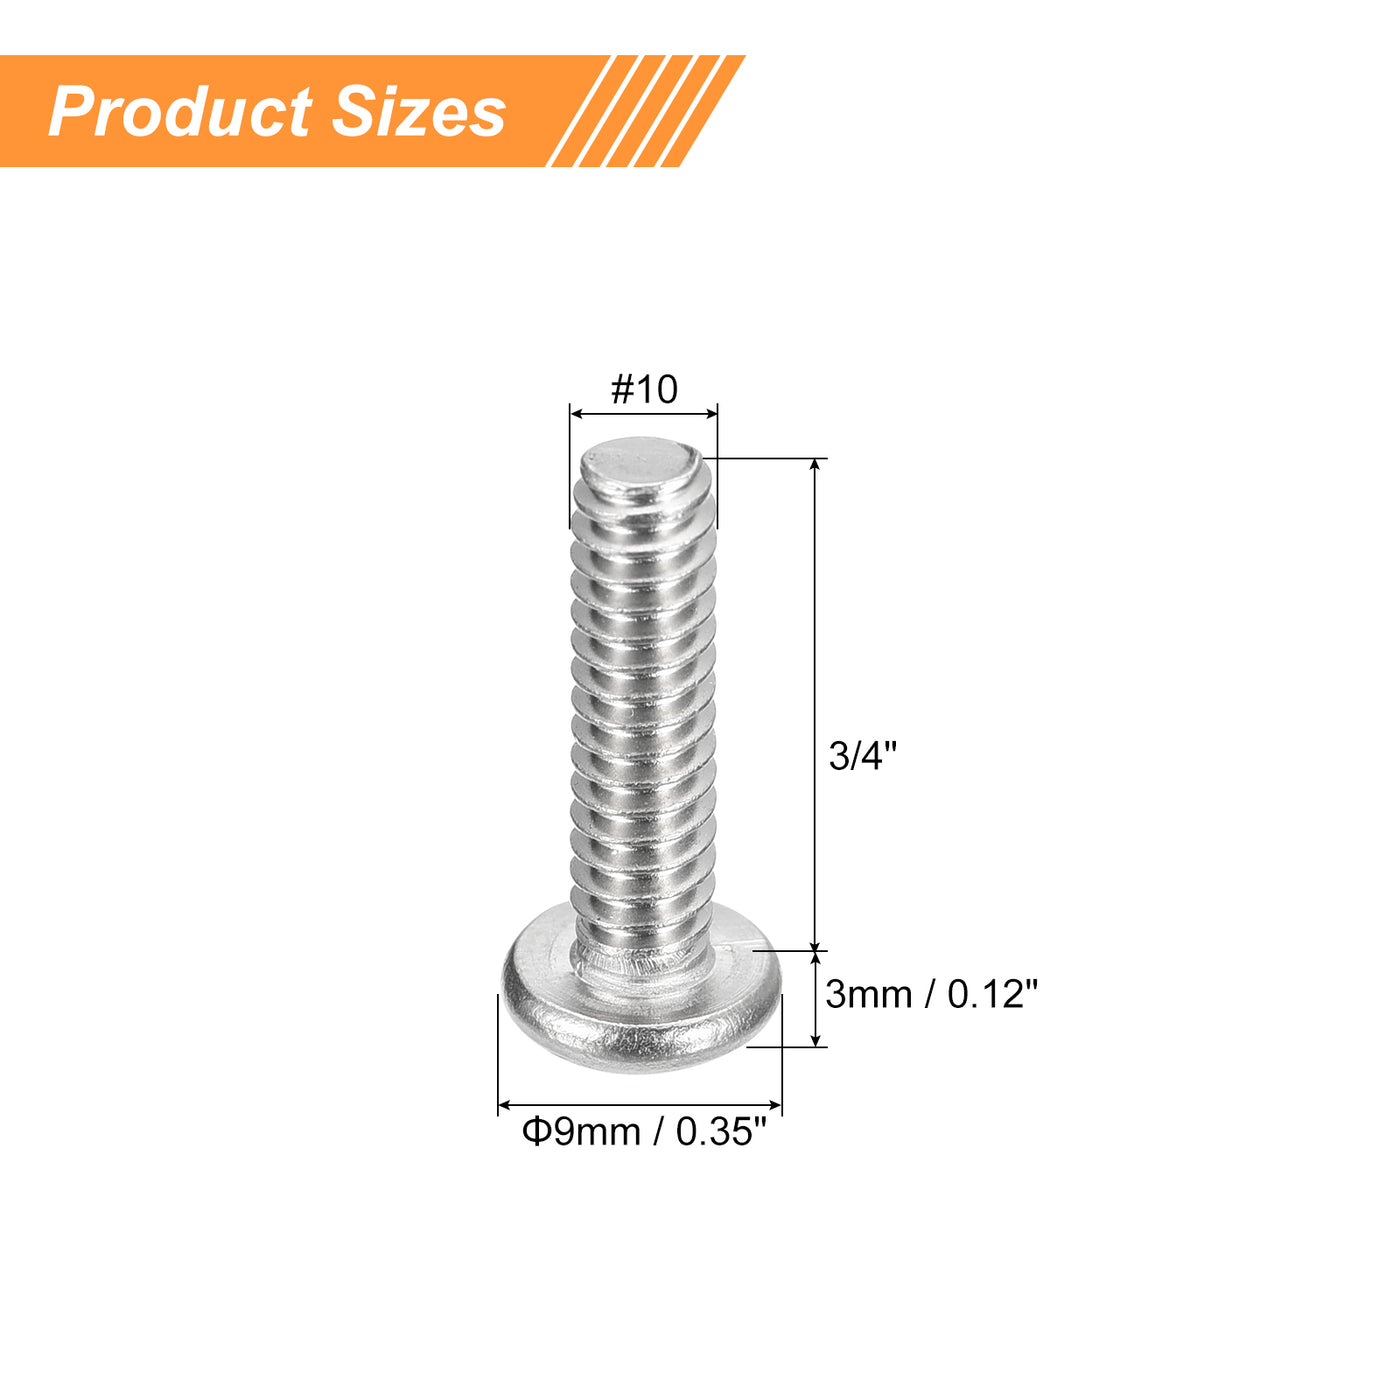 uxcell Uxcell #10-24x3/4" Pan Head Machine Screws, Stainless Steel 18-8 Screw, Pack of 20